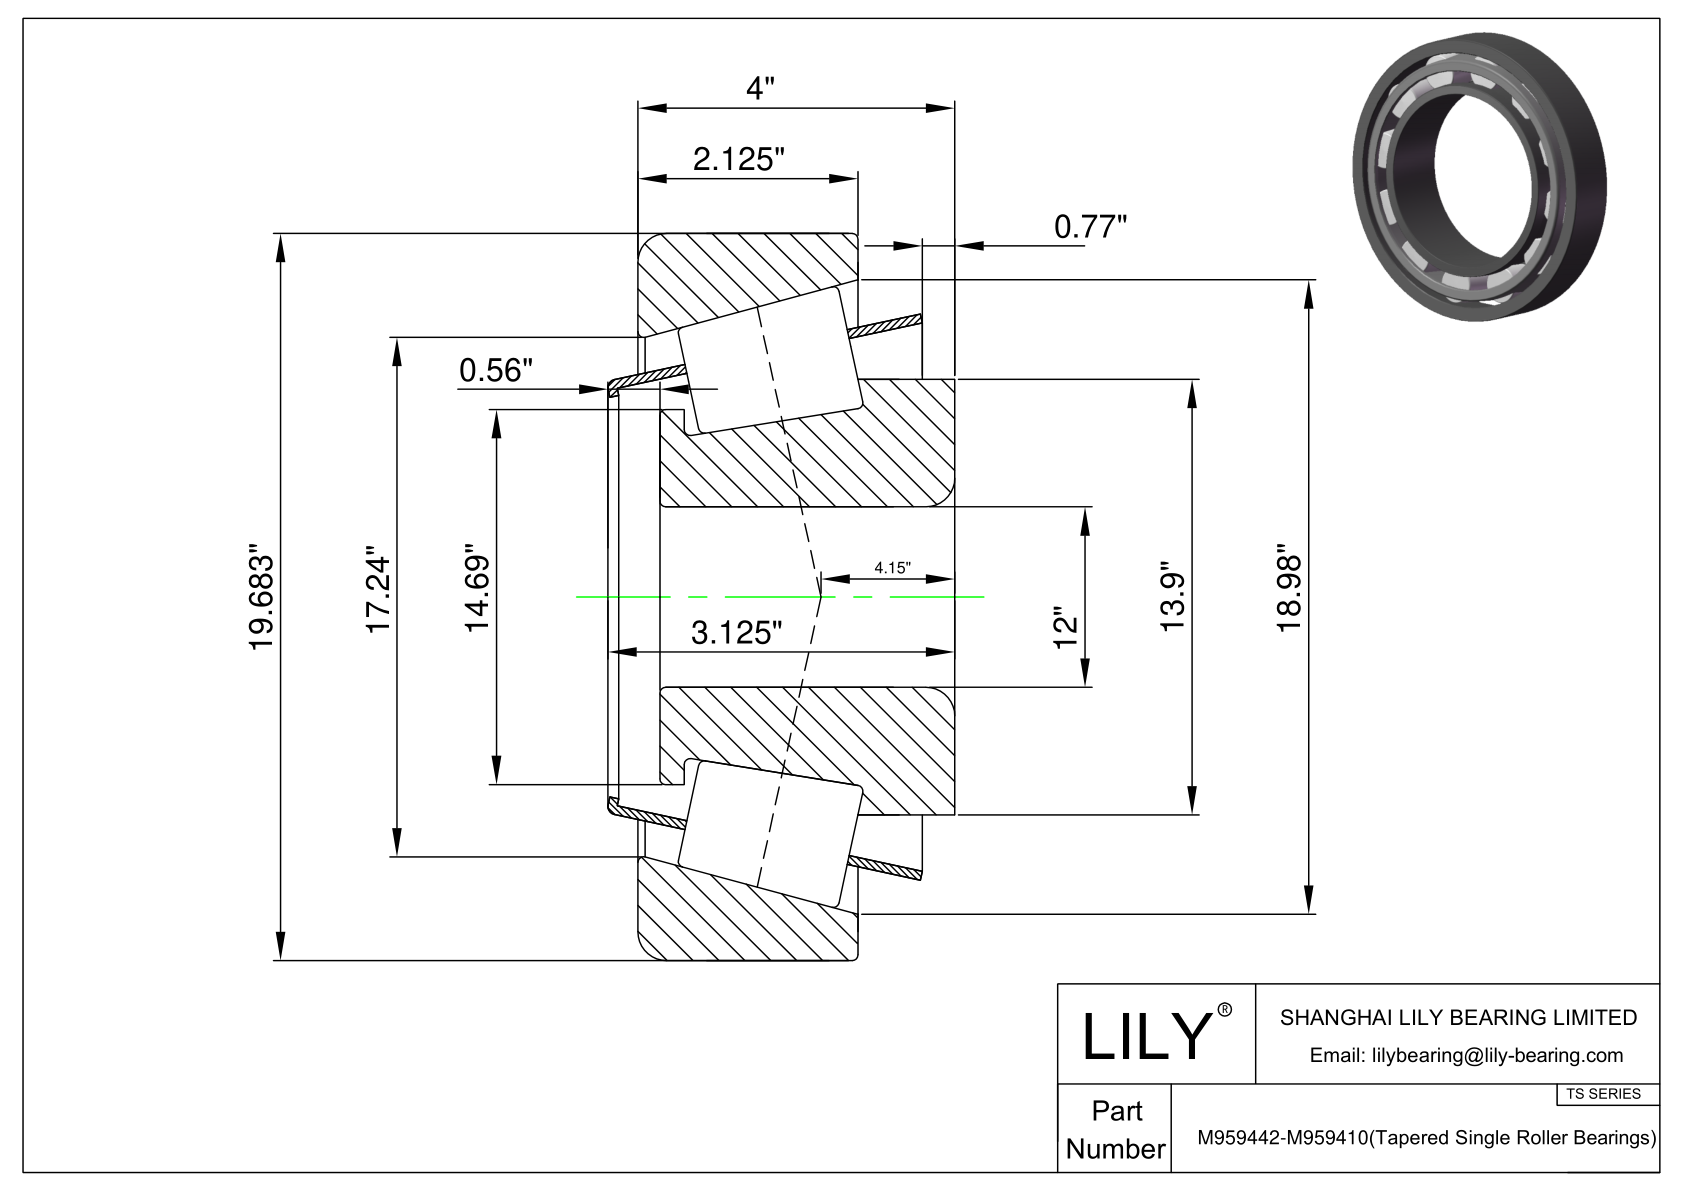 M959442-M959410 TS (Tapered Single Roller Bearings) (Imperial) cad drawing